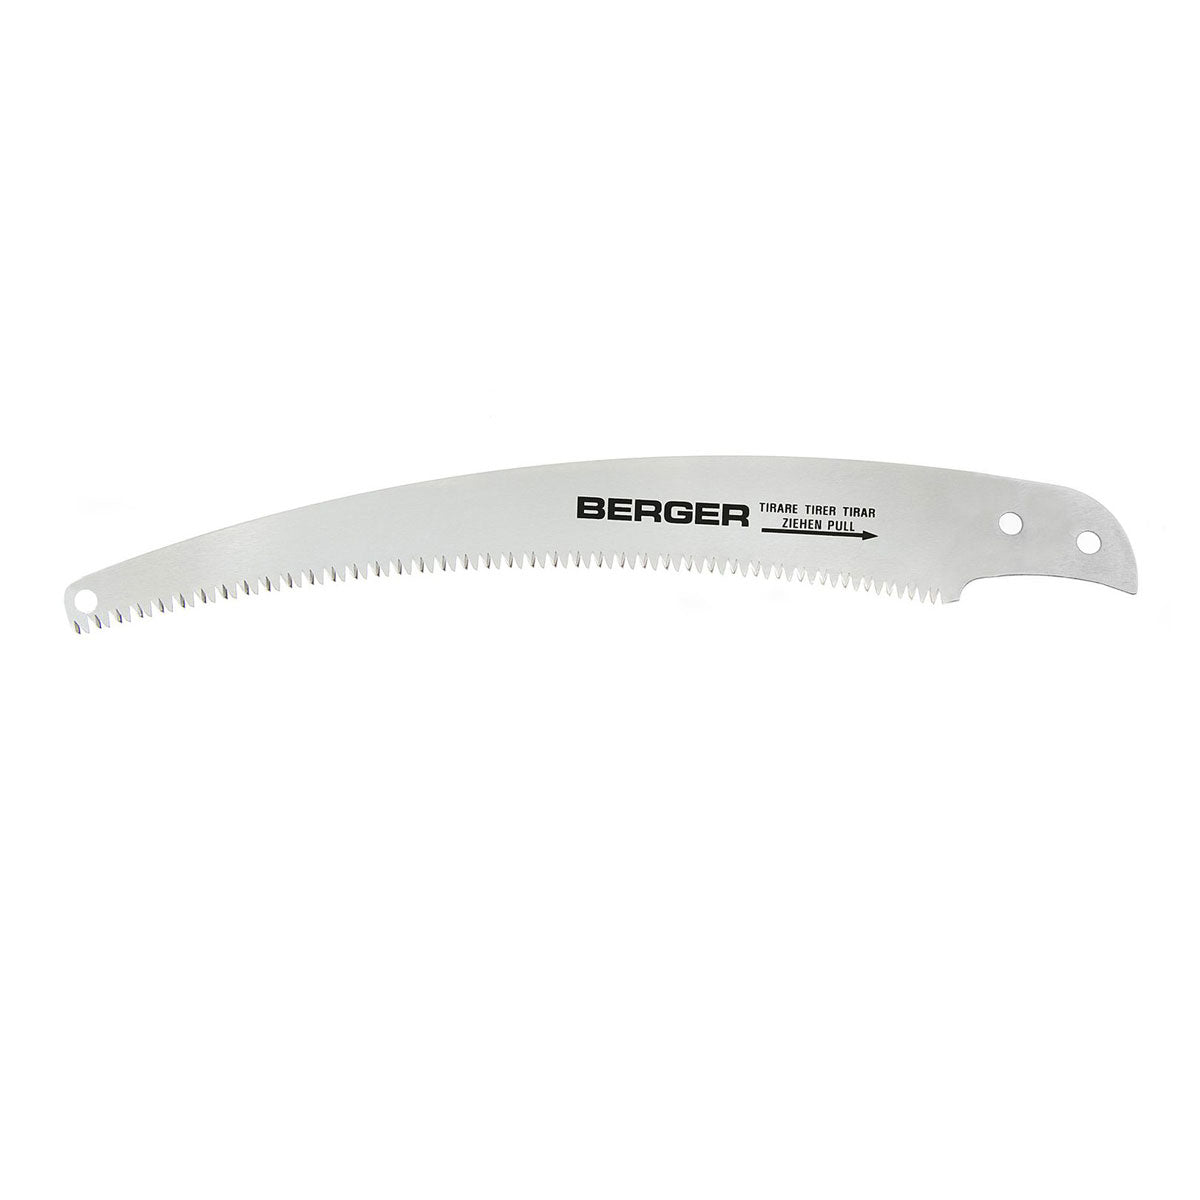 Berger 93912 Saw Blade for 63912, 63812